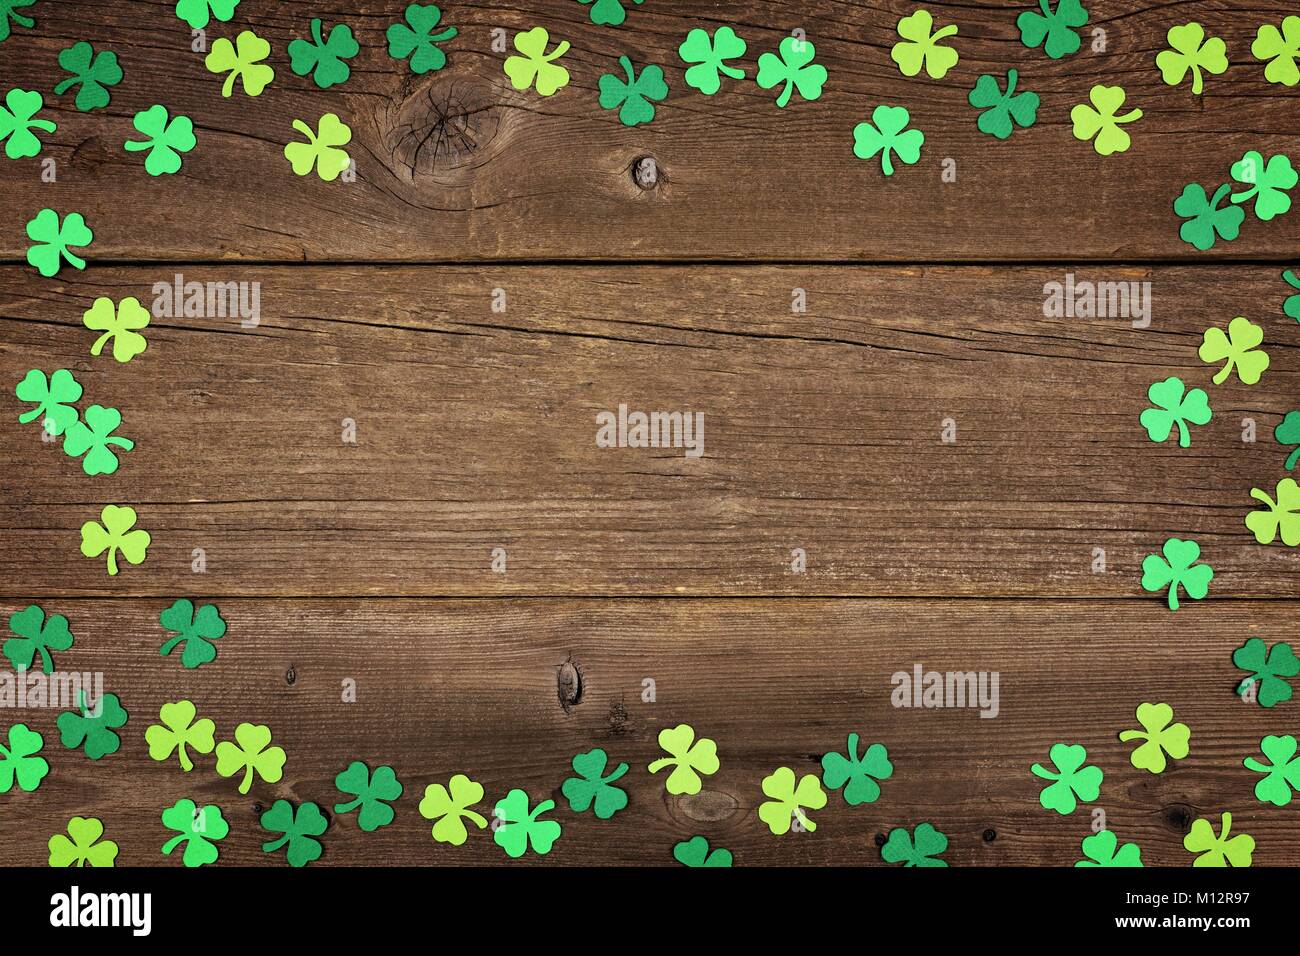 St Patricks Day frame of paper shamrocks over an old rustic wood background Stock Photo